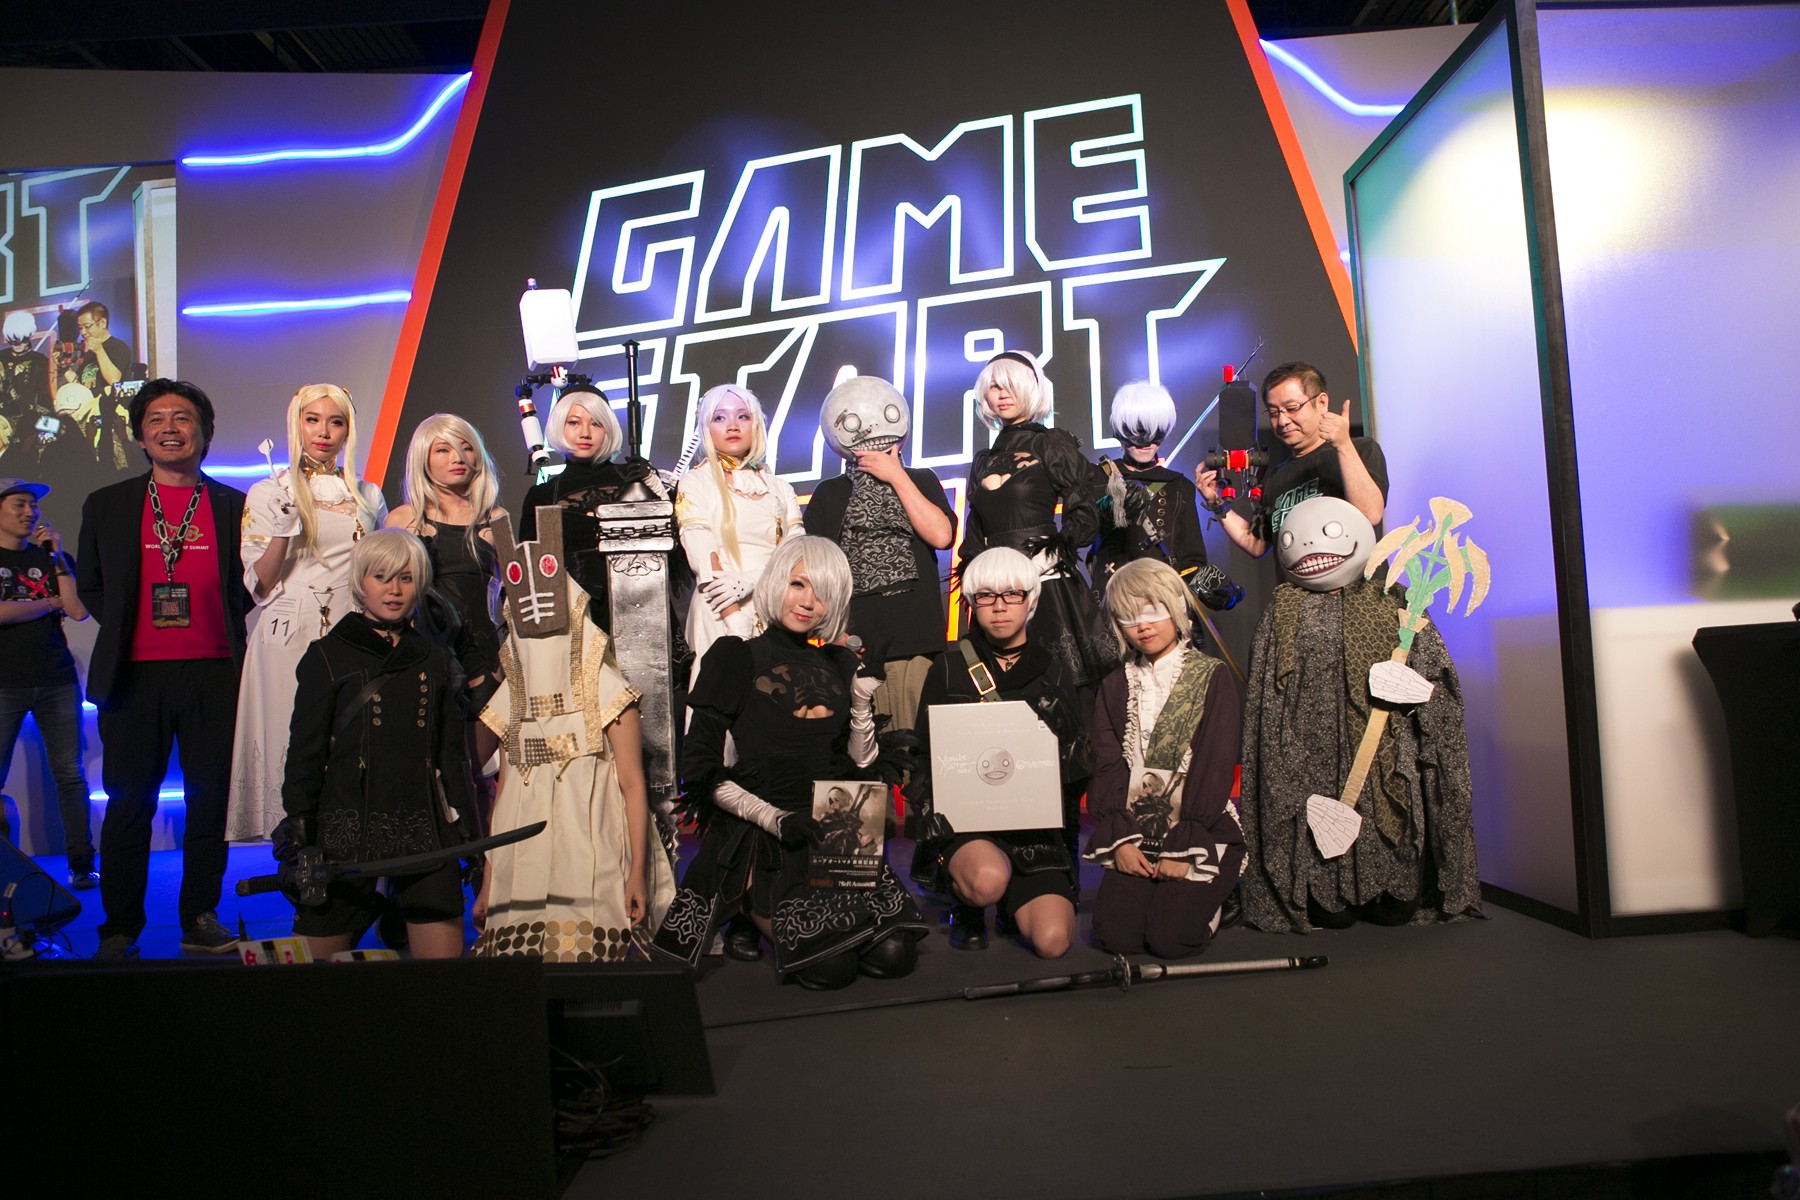 Cosplayers dressing up as characters from the video game Nier wait for judging at Singapore’s GameStart Asia convention.